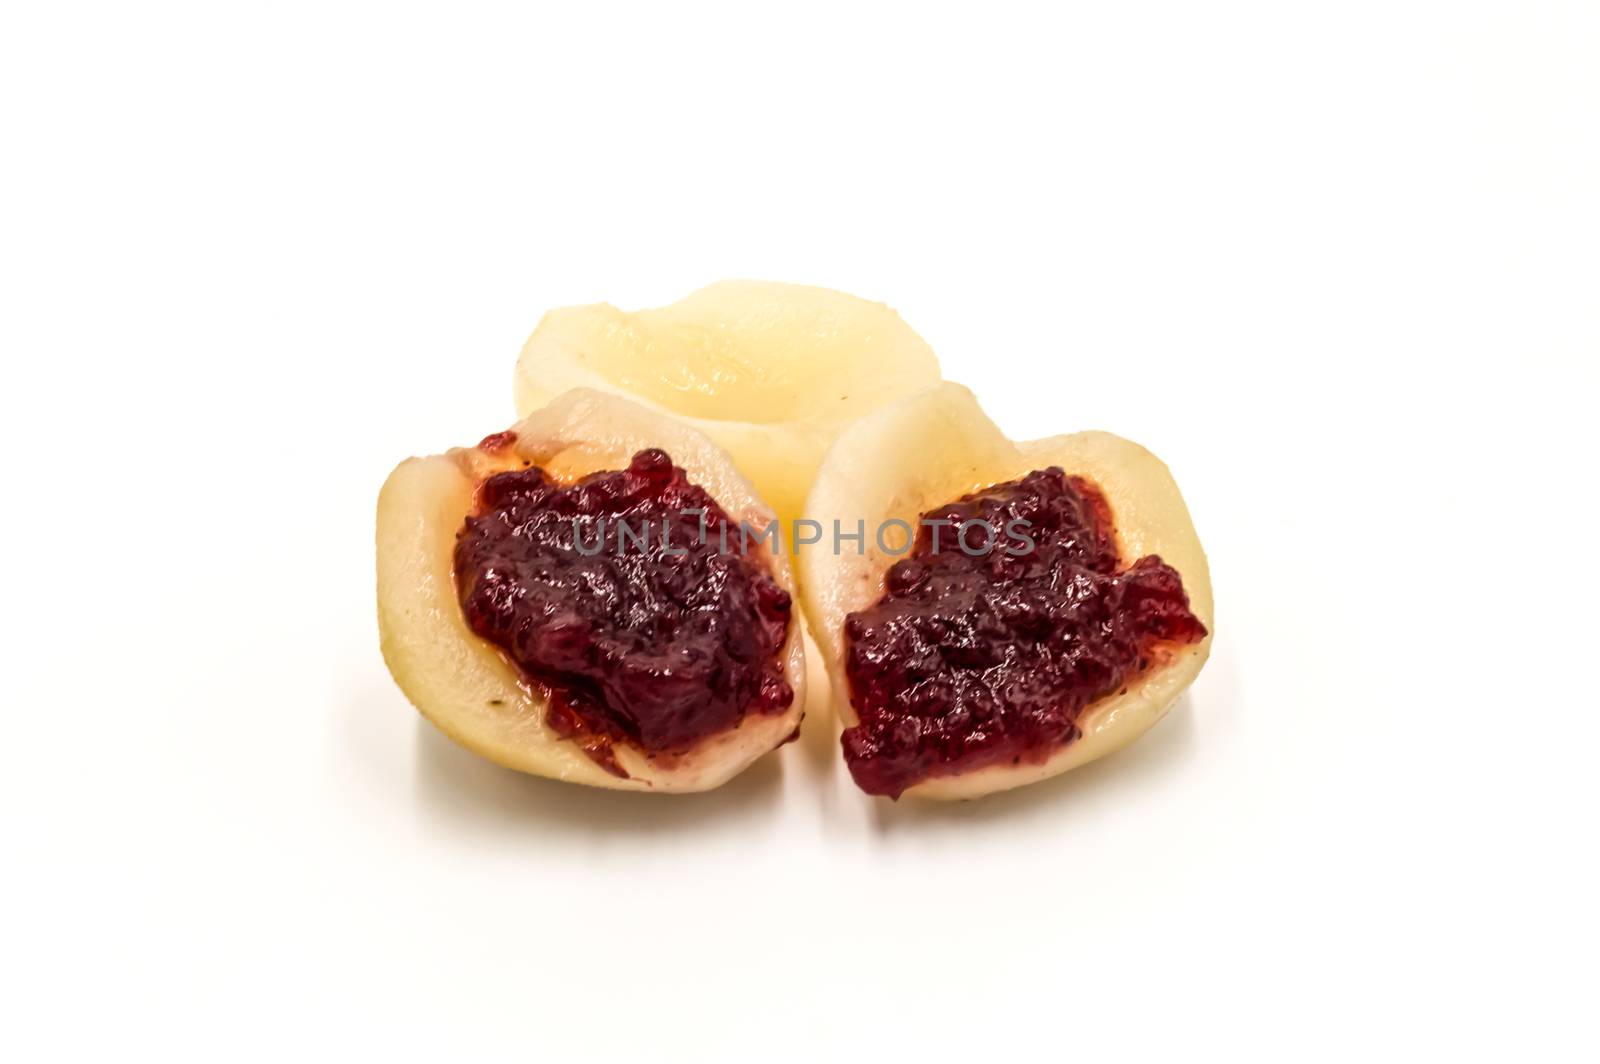 Pear cooked with lingonberry jam on a white background